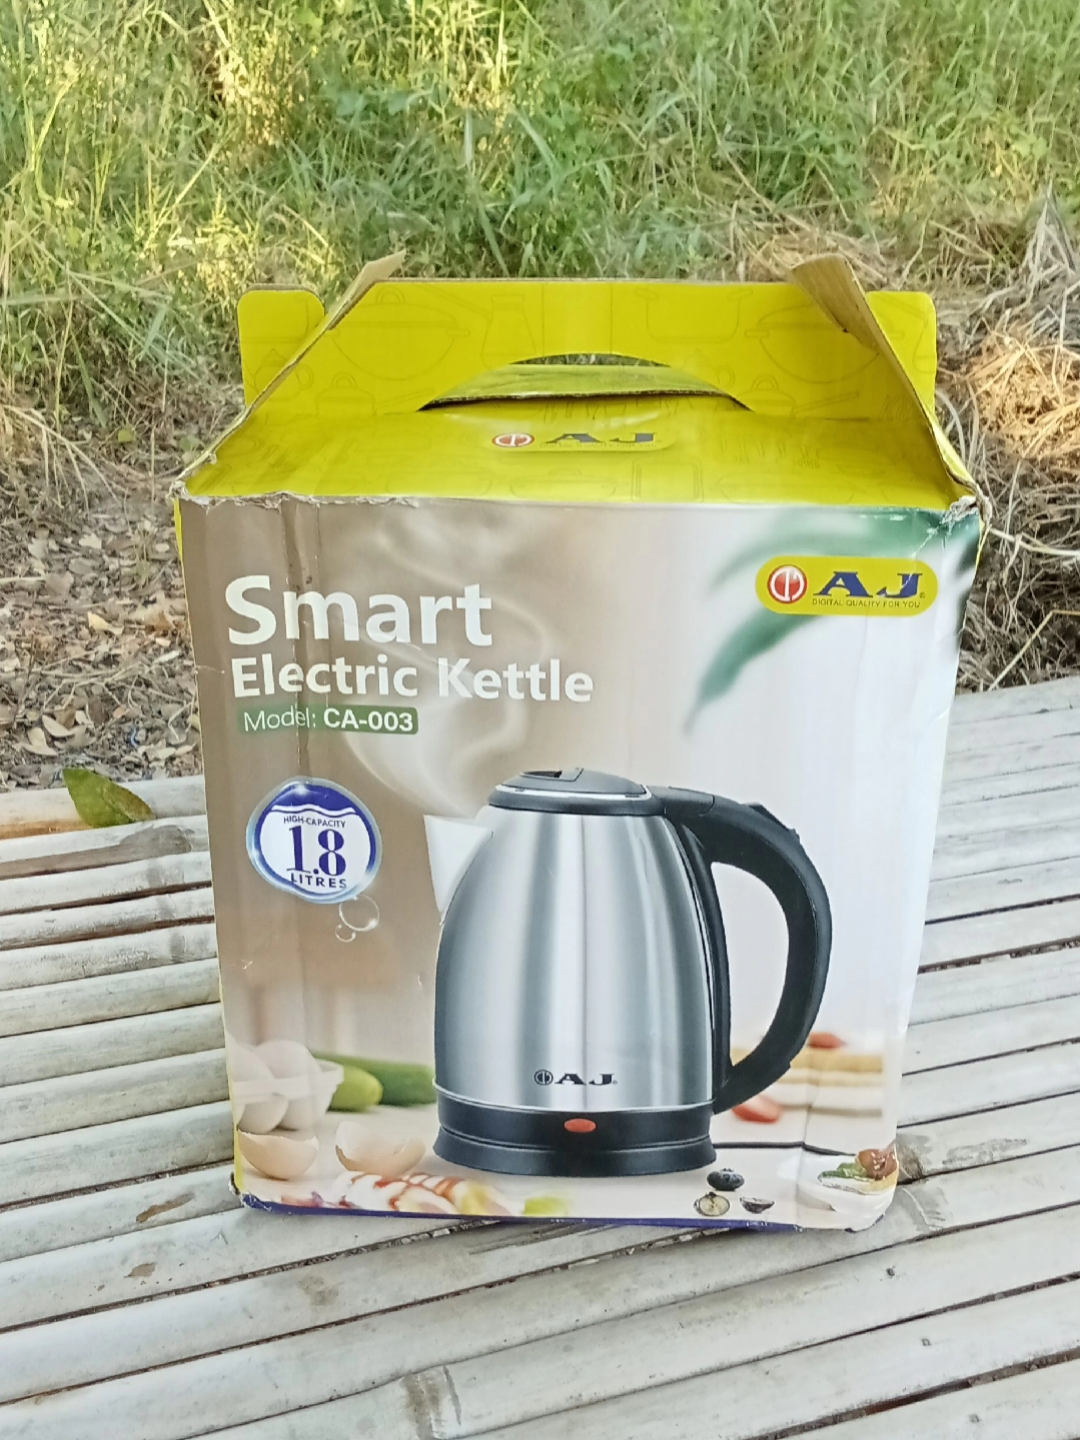 Unbox the Beautiful by Drew Barrymore gooseneck electric kettle